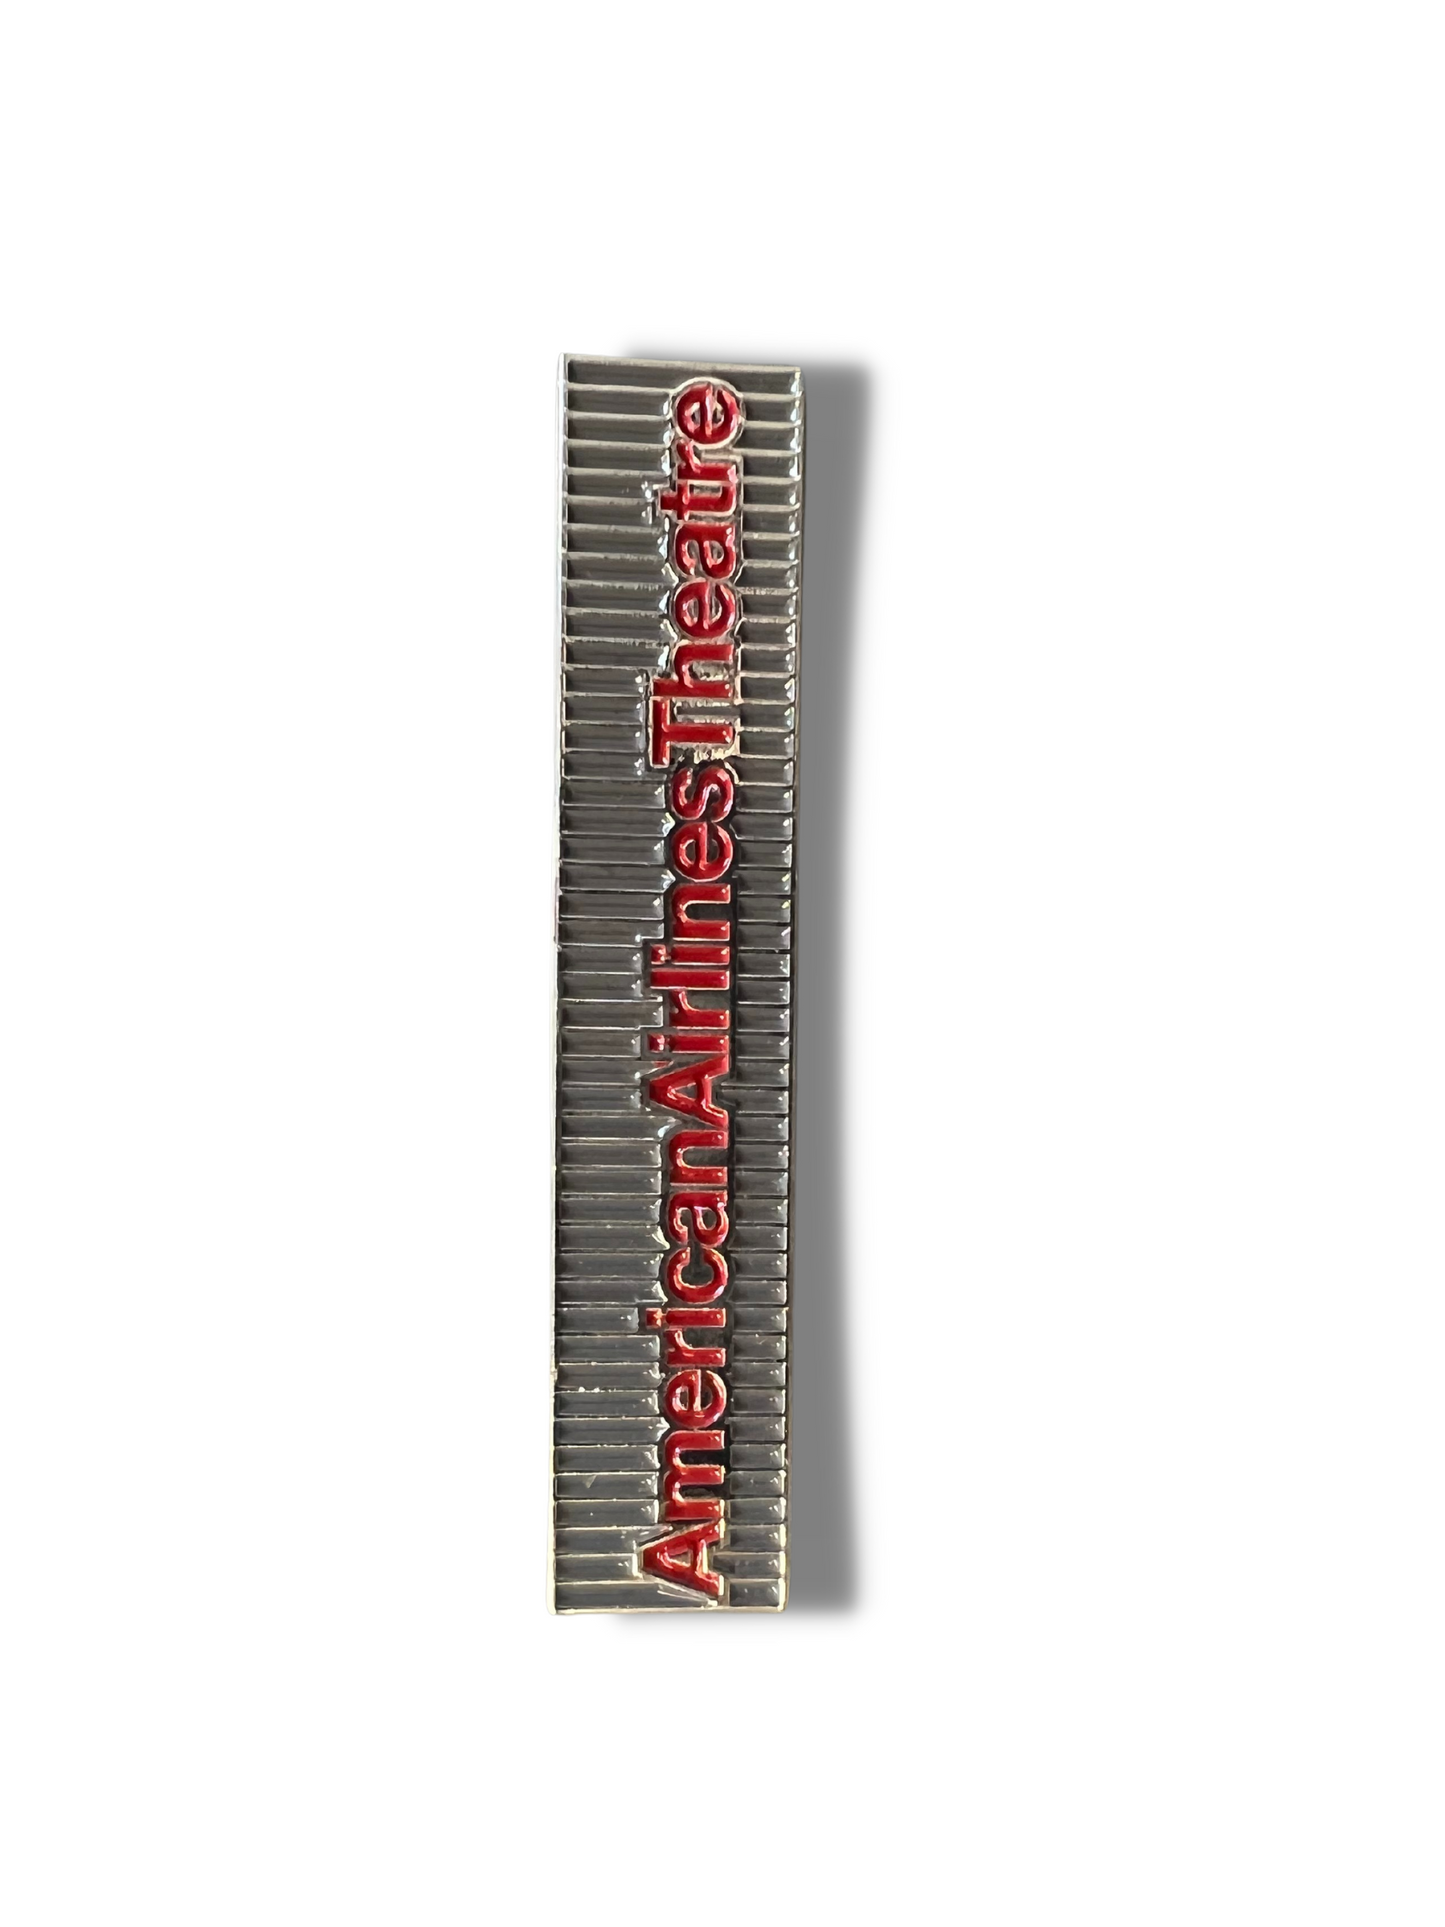 American Airlines Marquee Enamel Pin